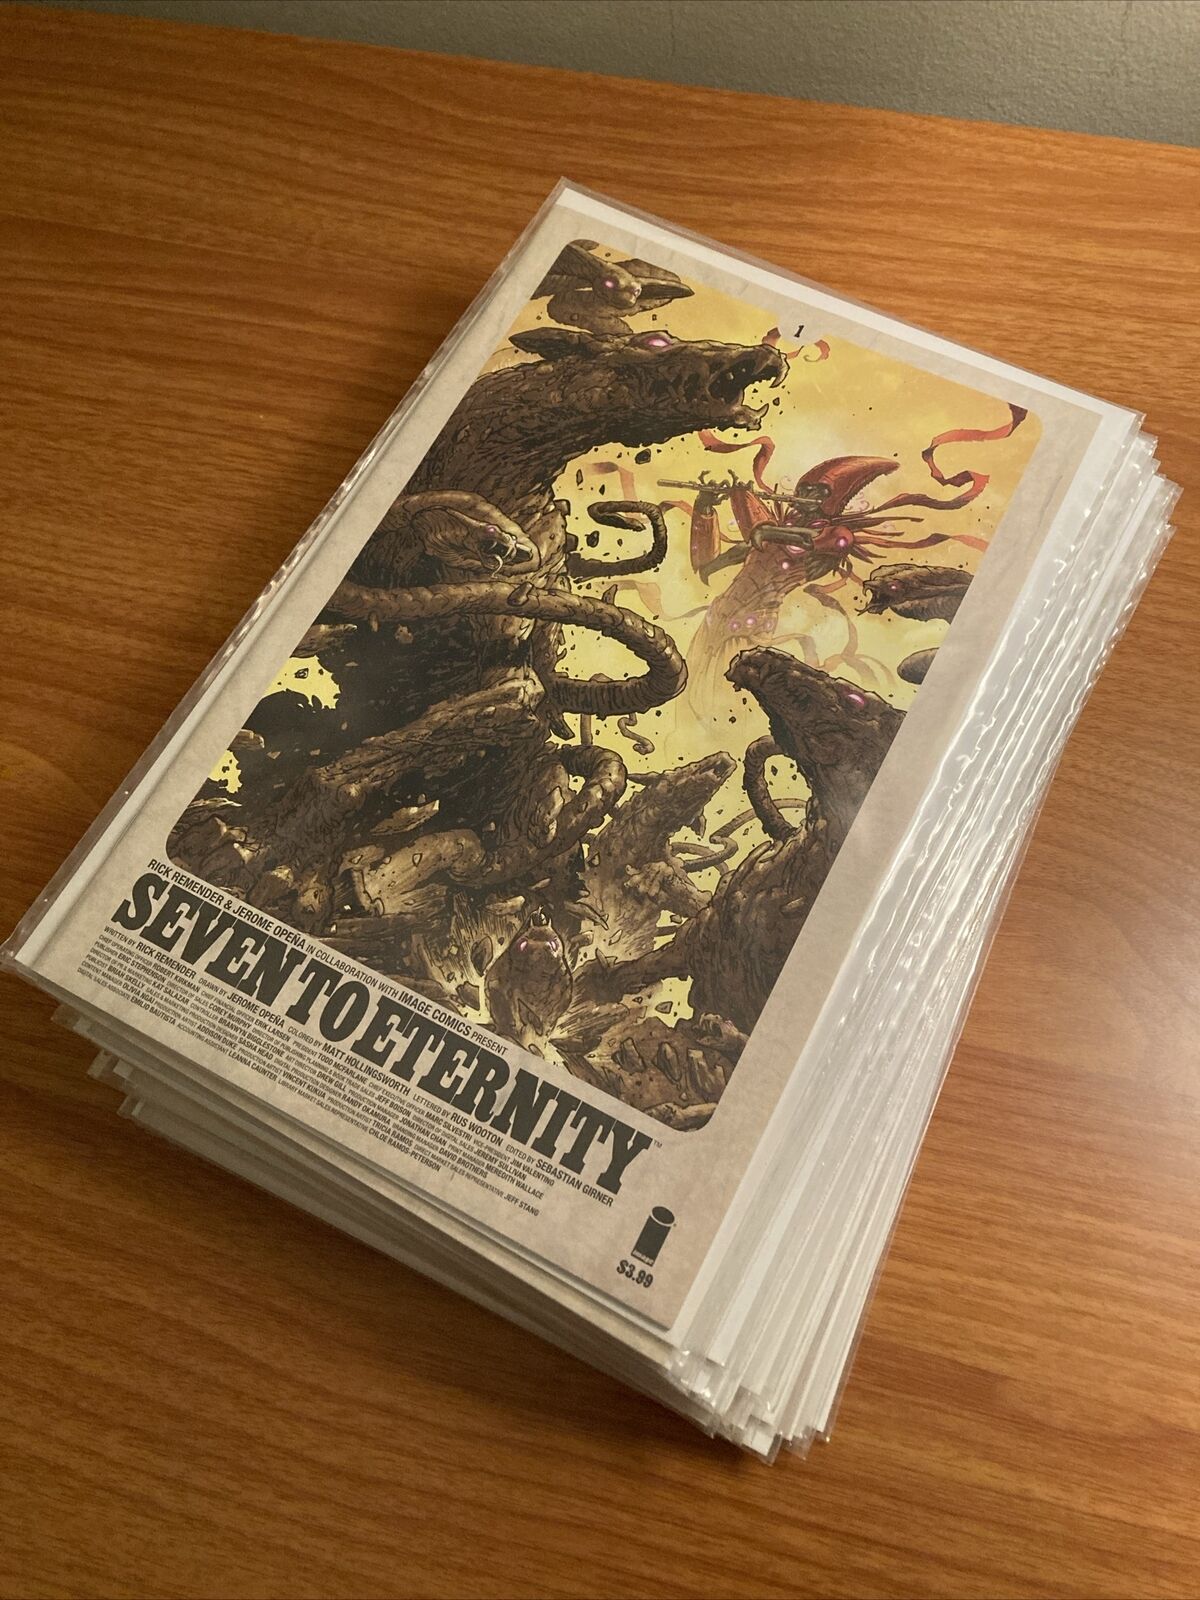 Seven To Eternity #1-17 Complete Series Image Comics 2016 w/ Variants